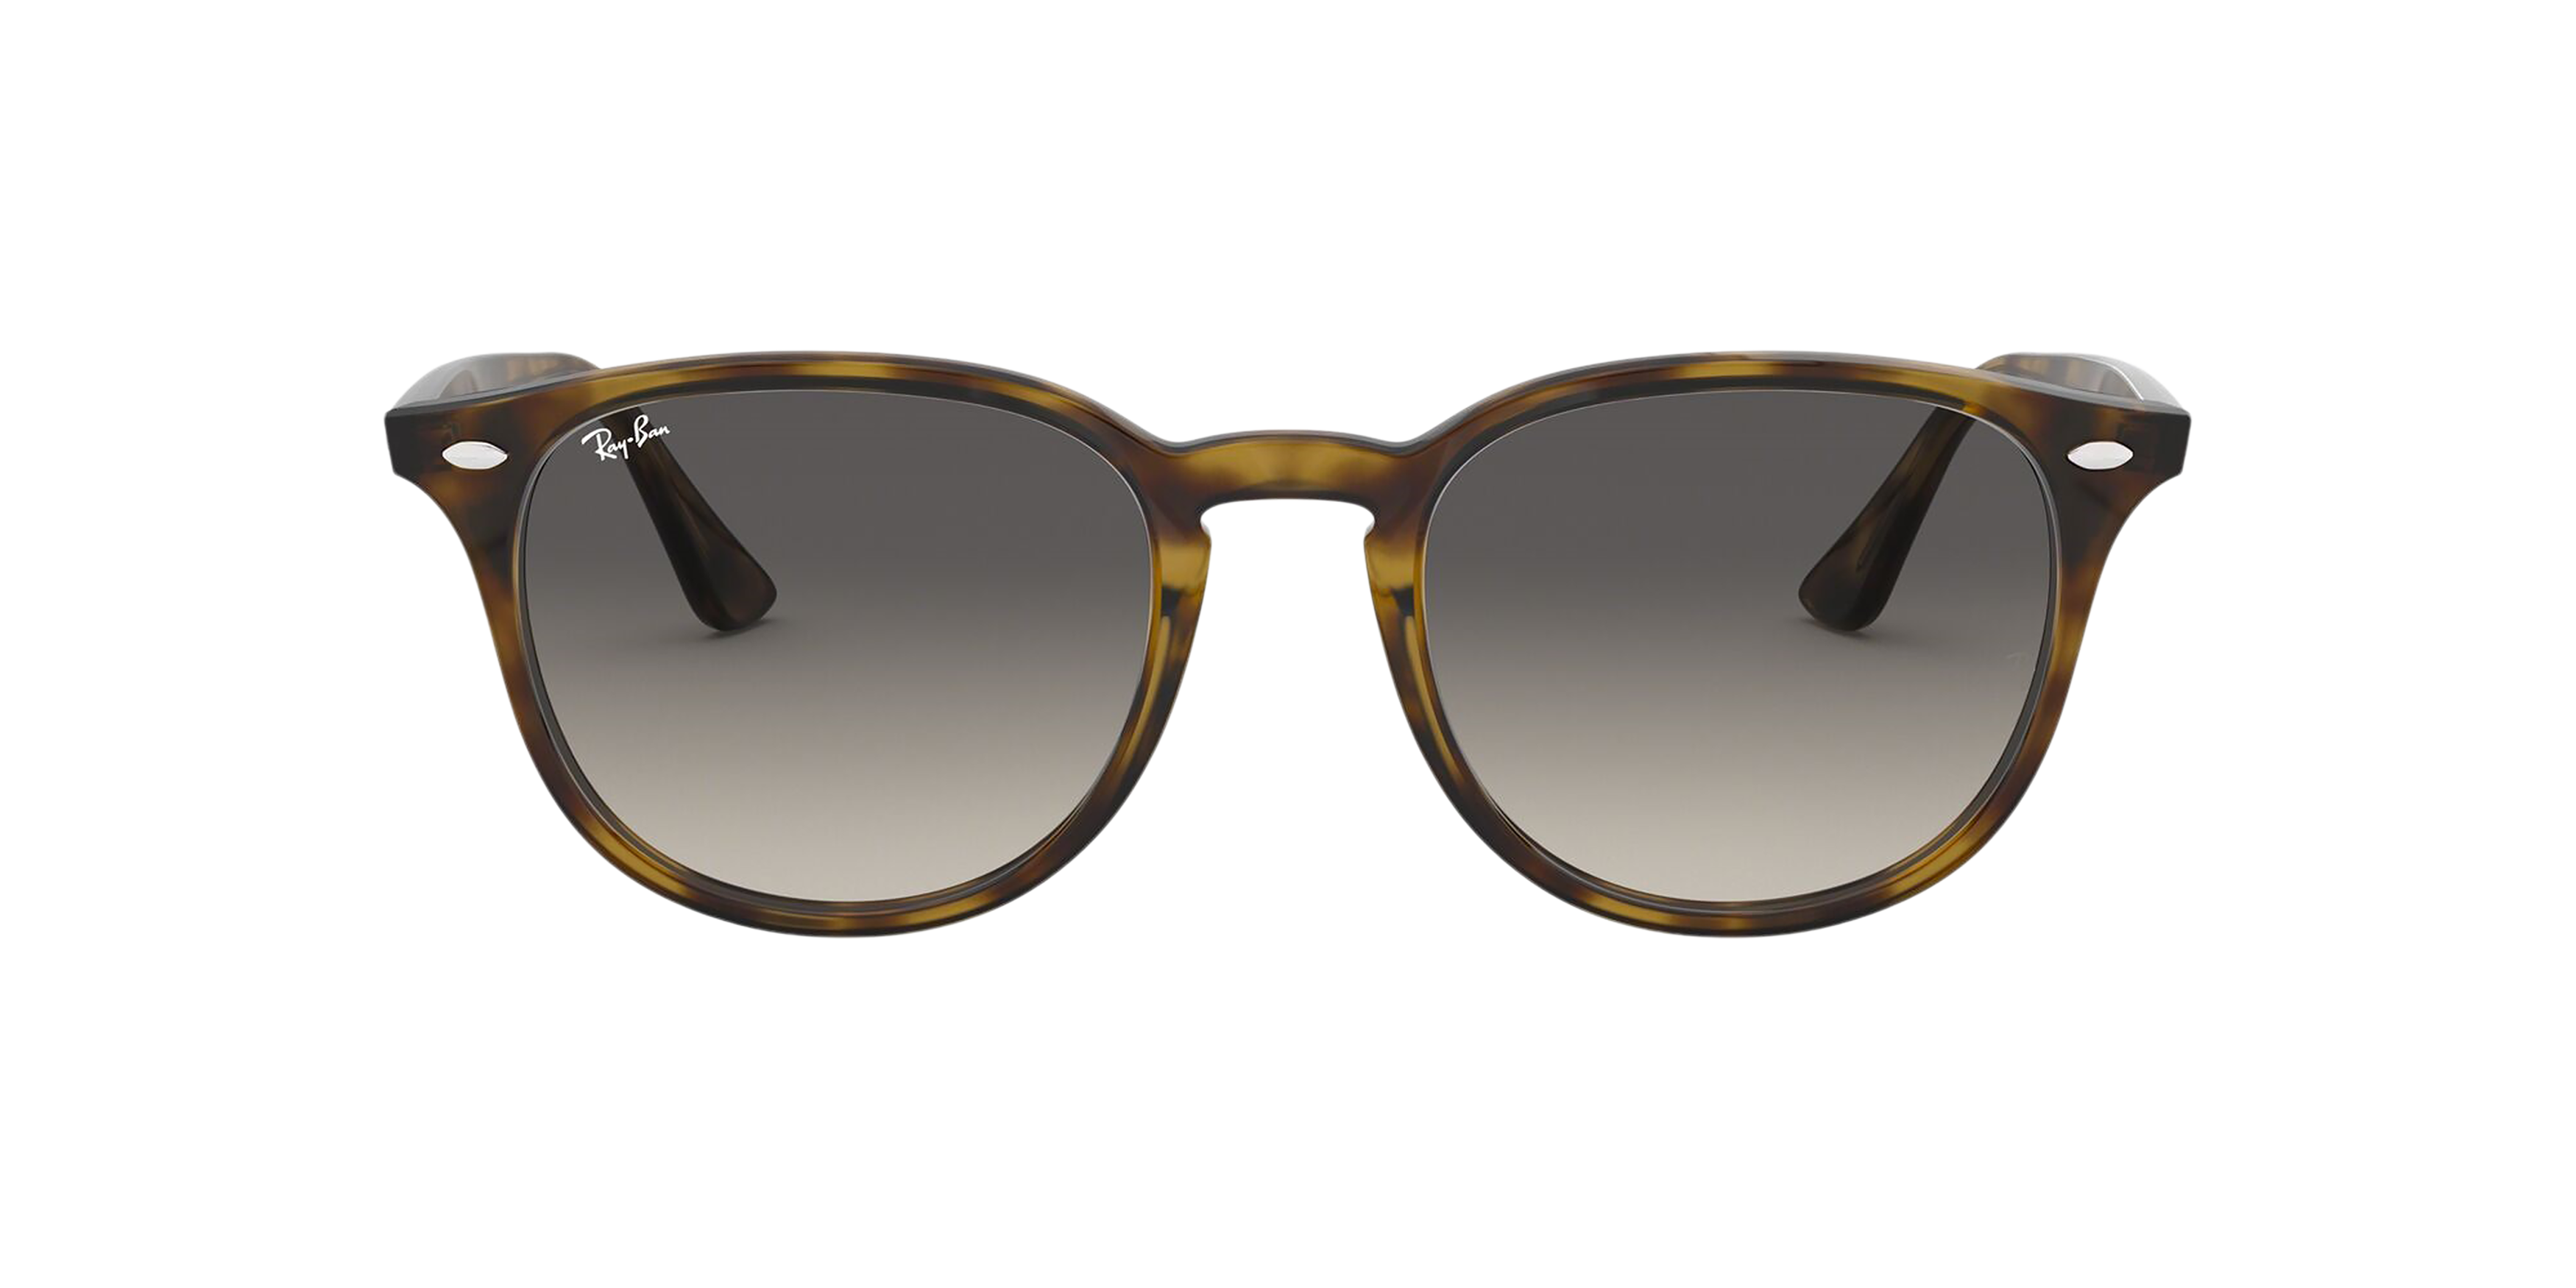 [products.image.front] Ray-Ban RB4259 710/11